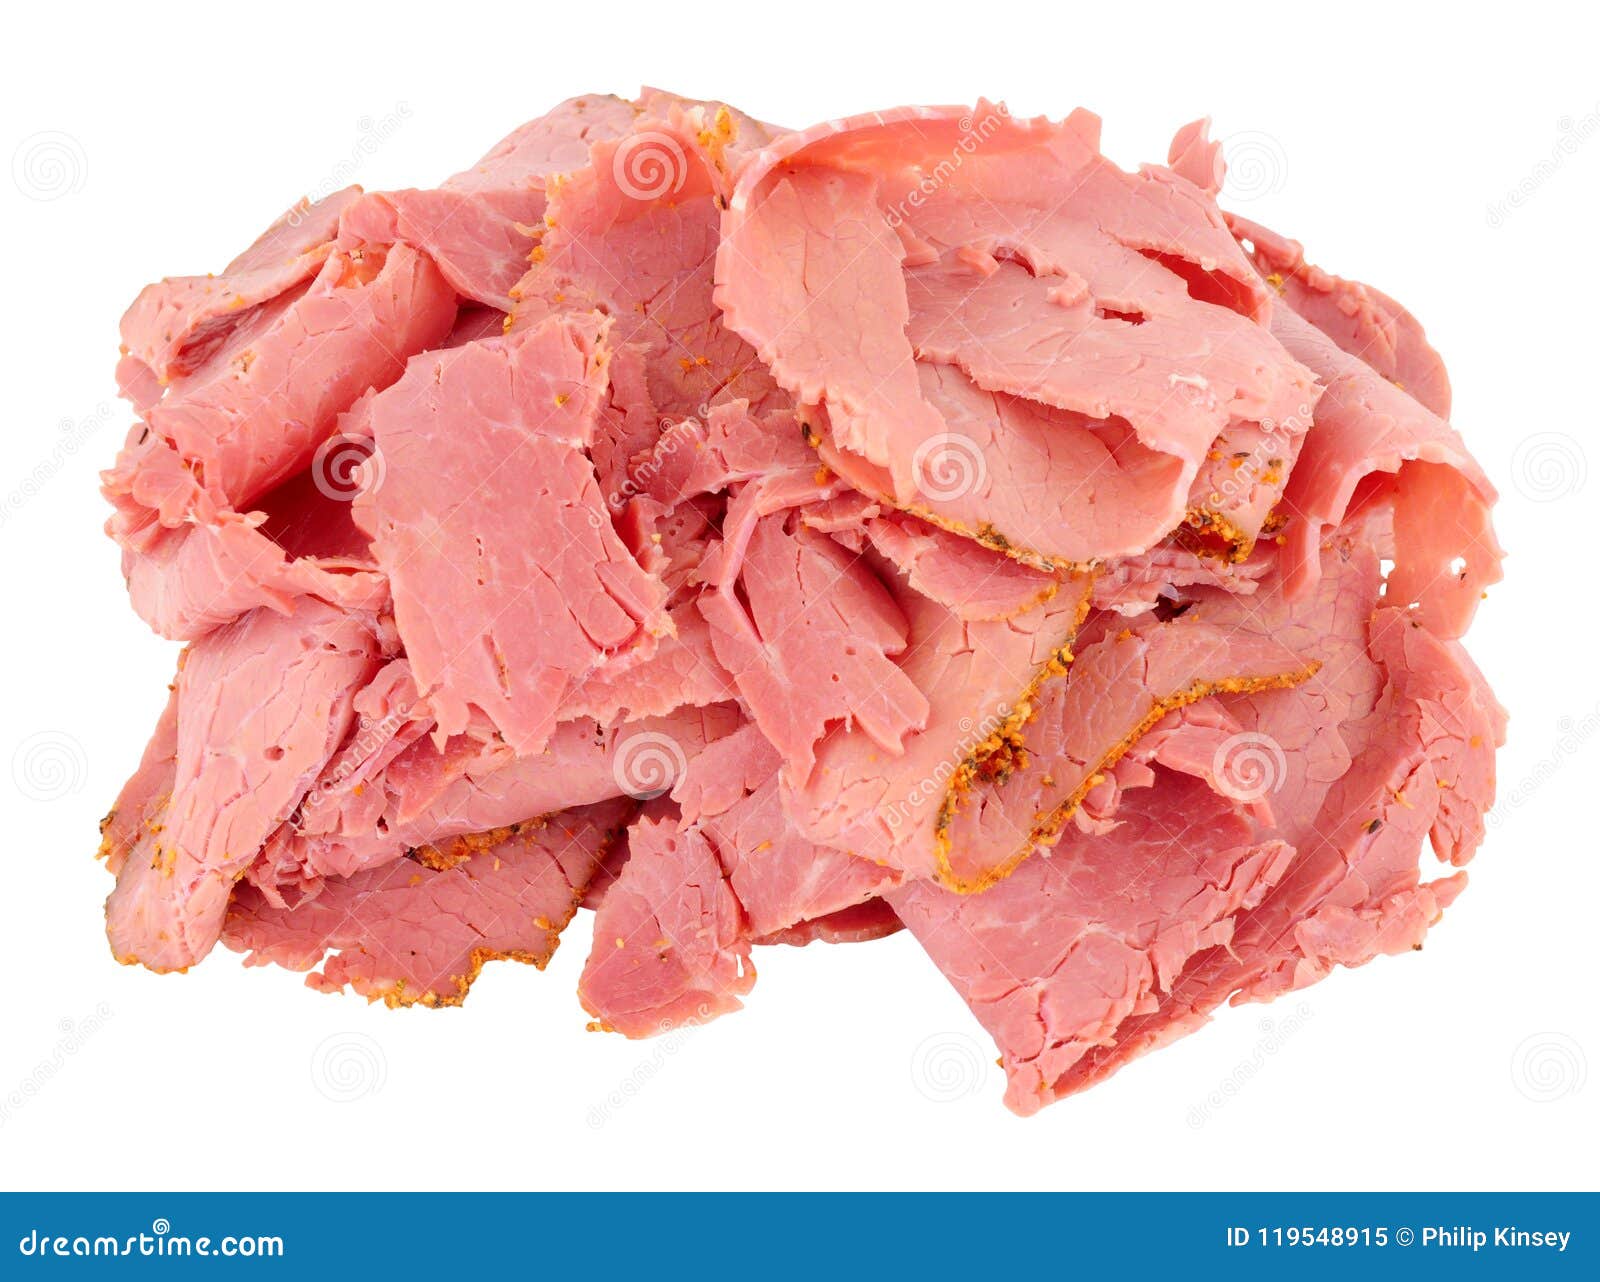 Pile of Thinly Sliced Pastrami Meat Stock Image - Image of seasoned,  background: 119548915